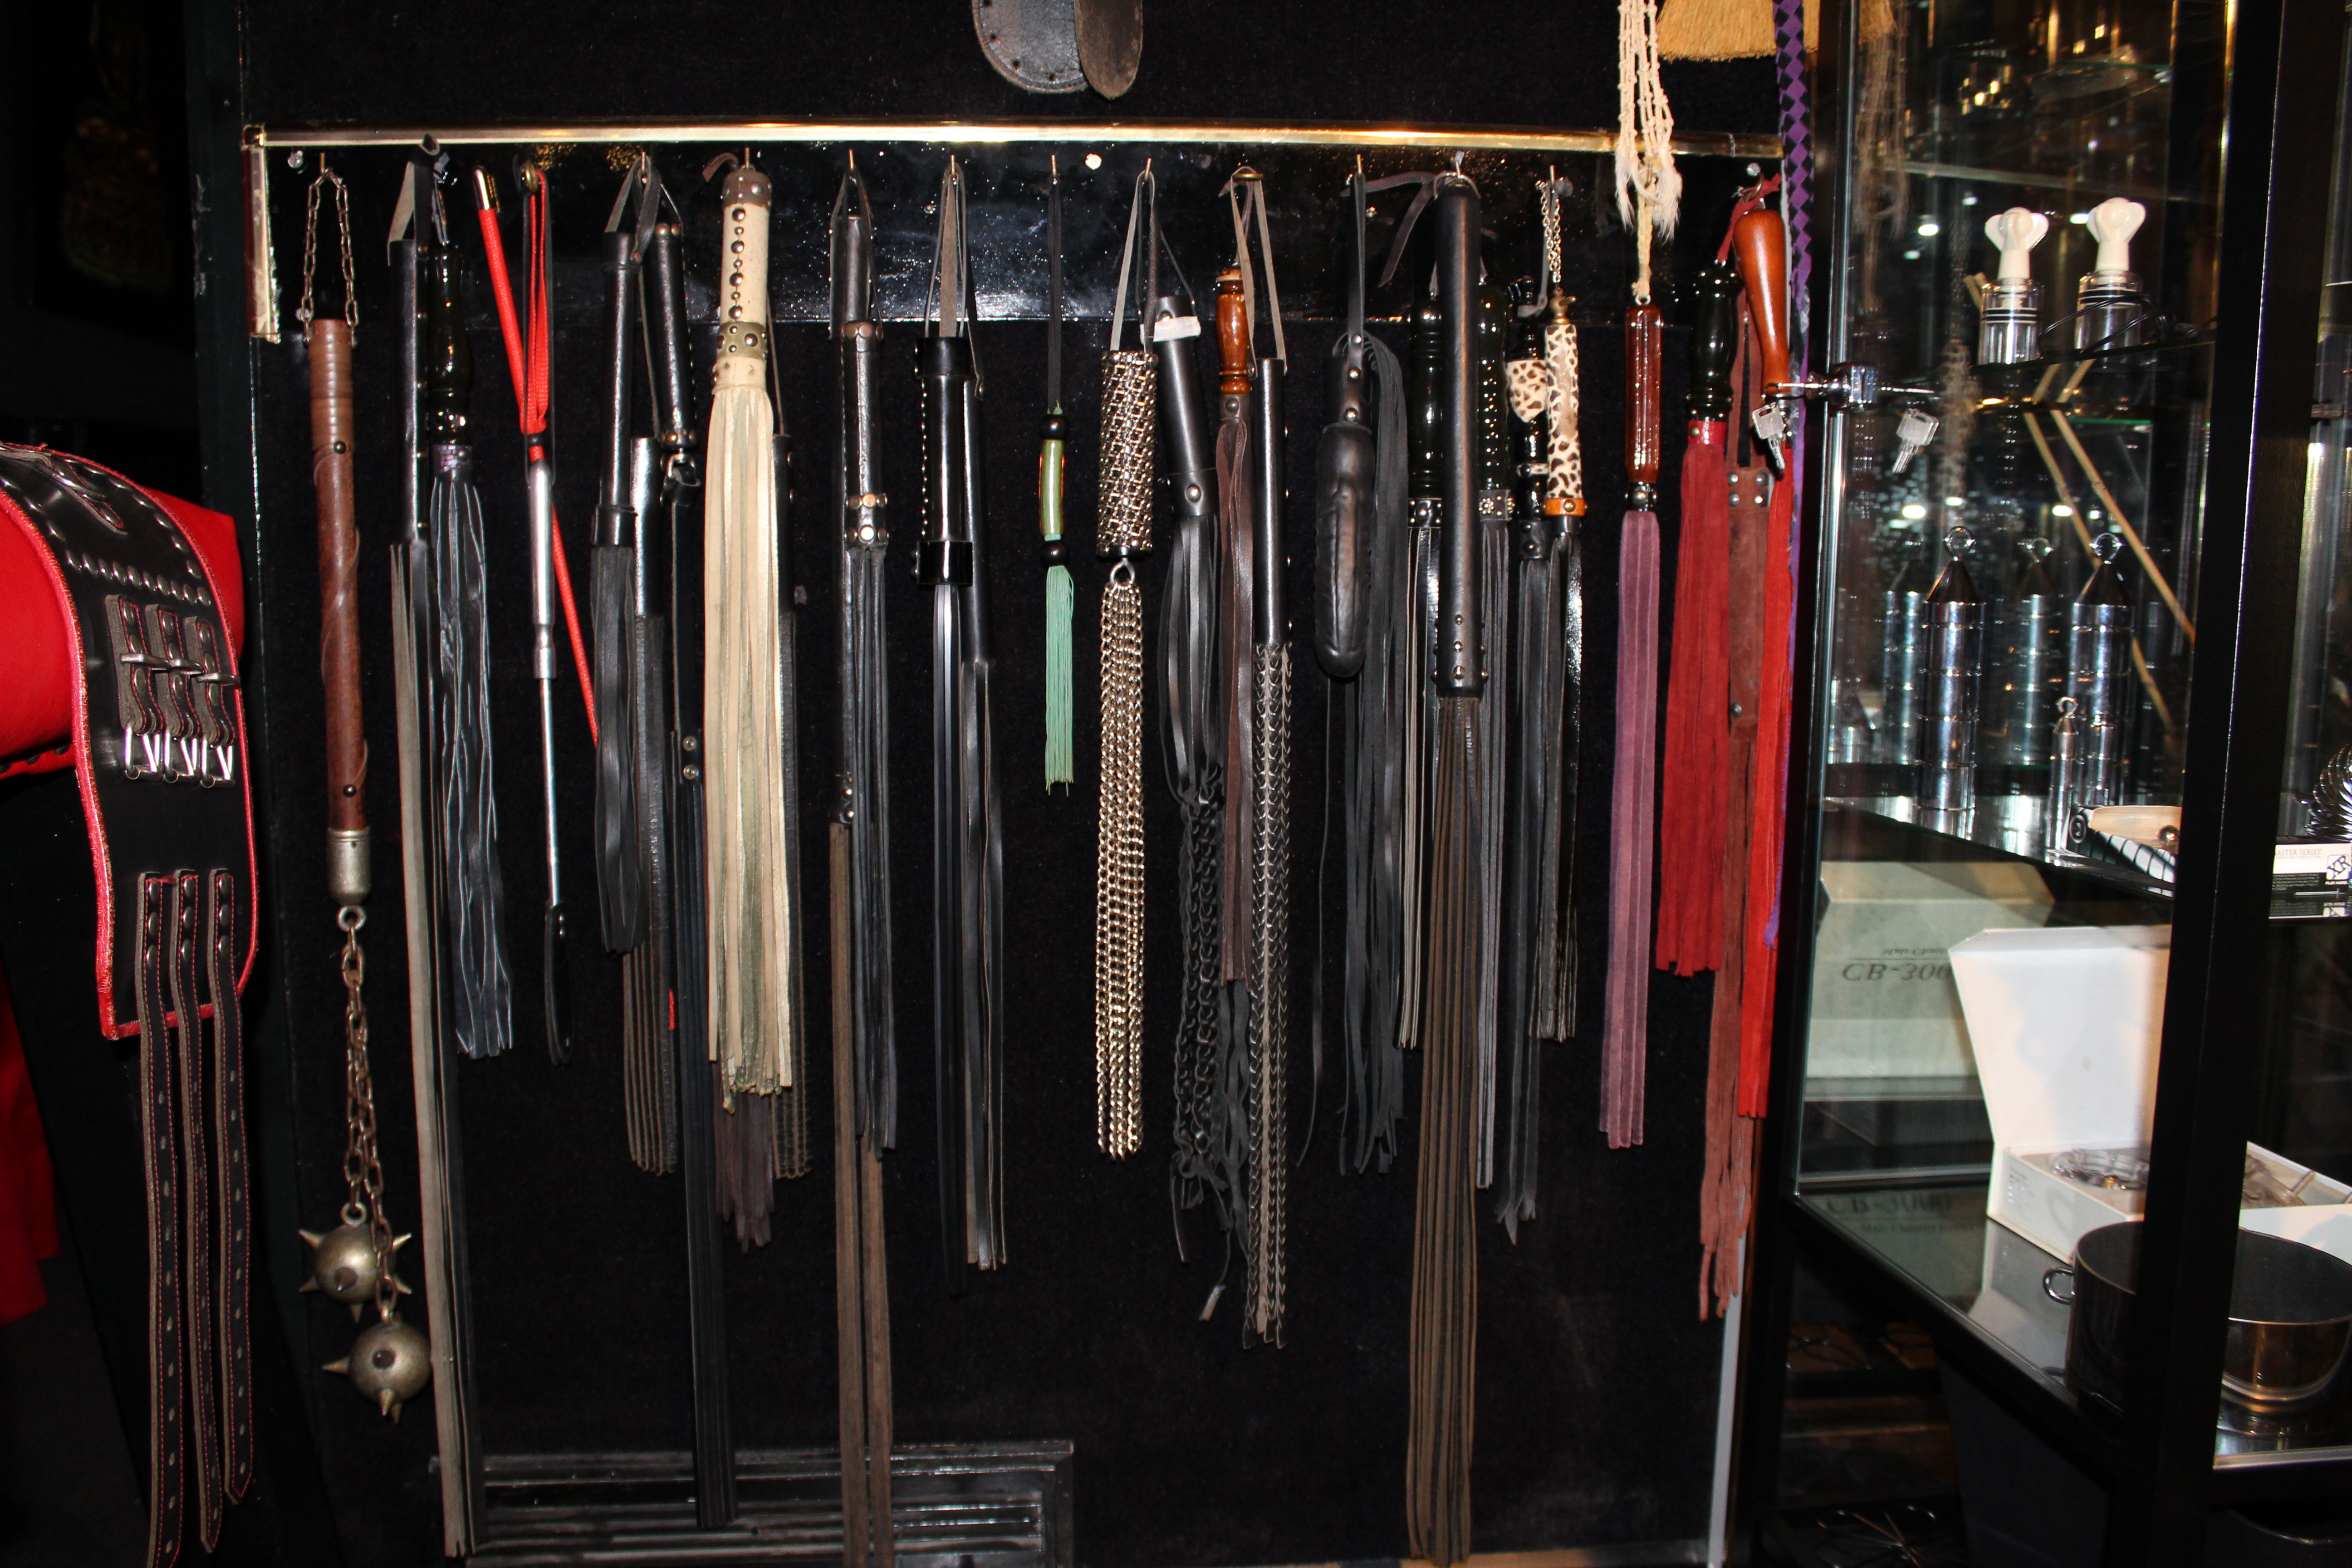 Mistress Emma blog, about the whips